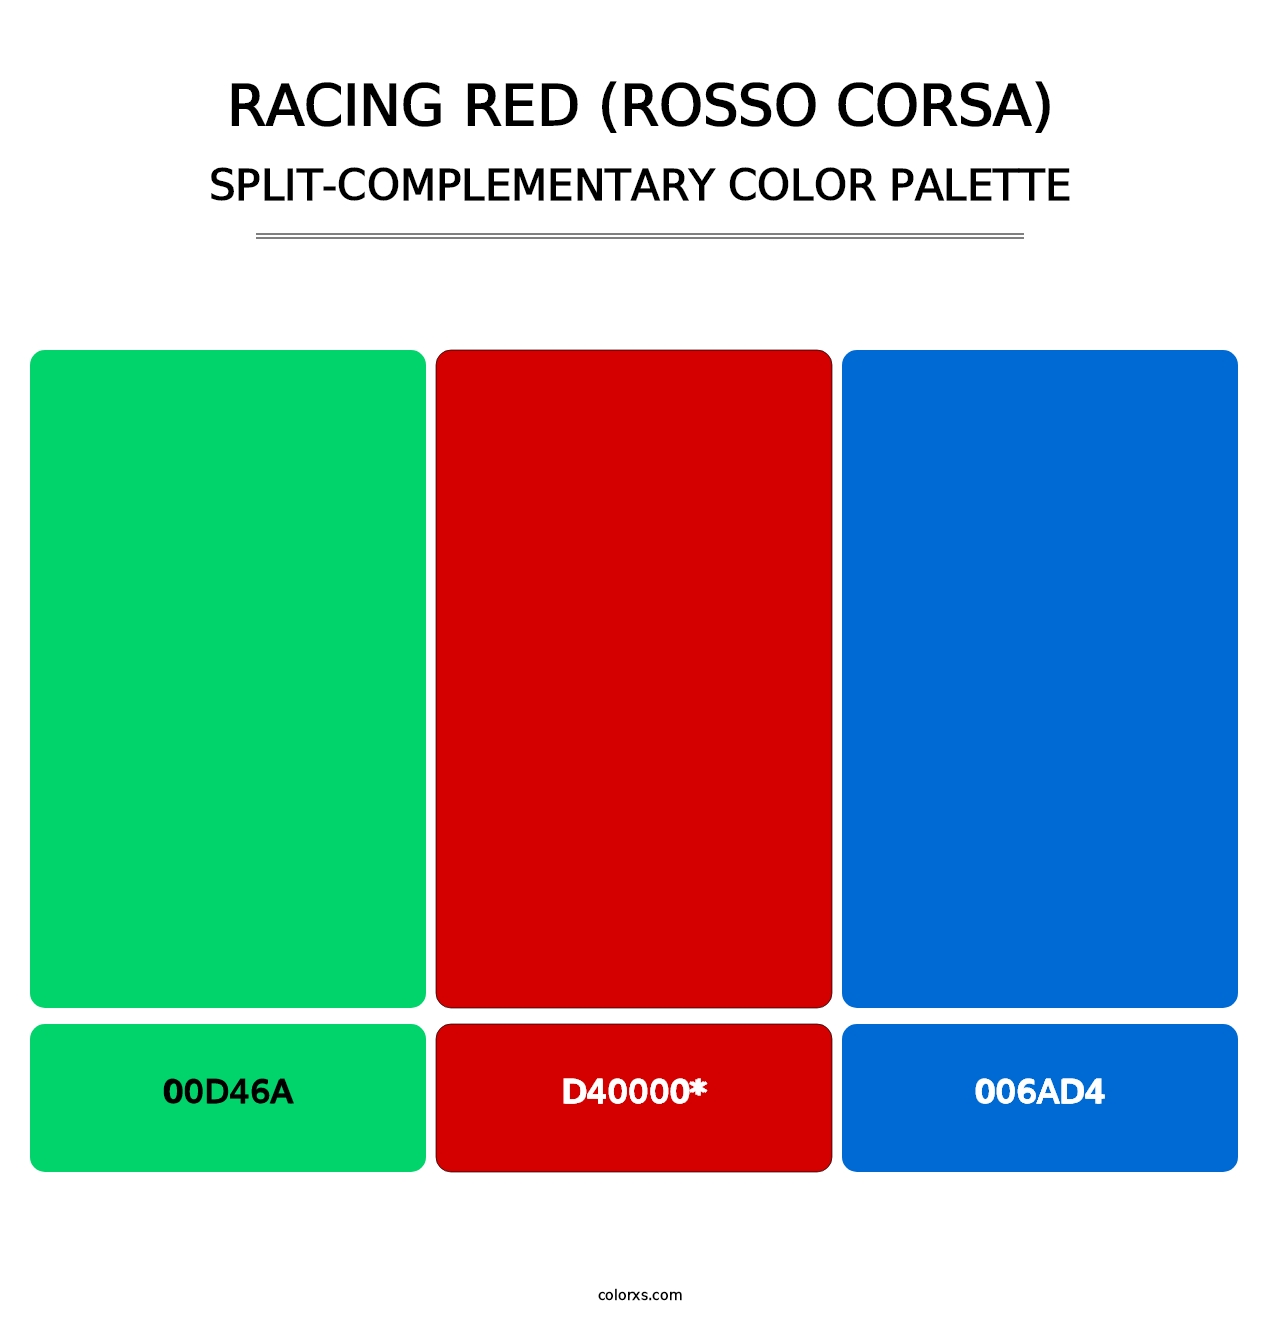 Racing Red (Rosso Corsa) - Split-Complementary Color Palette